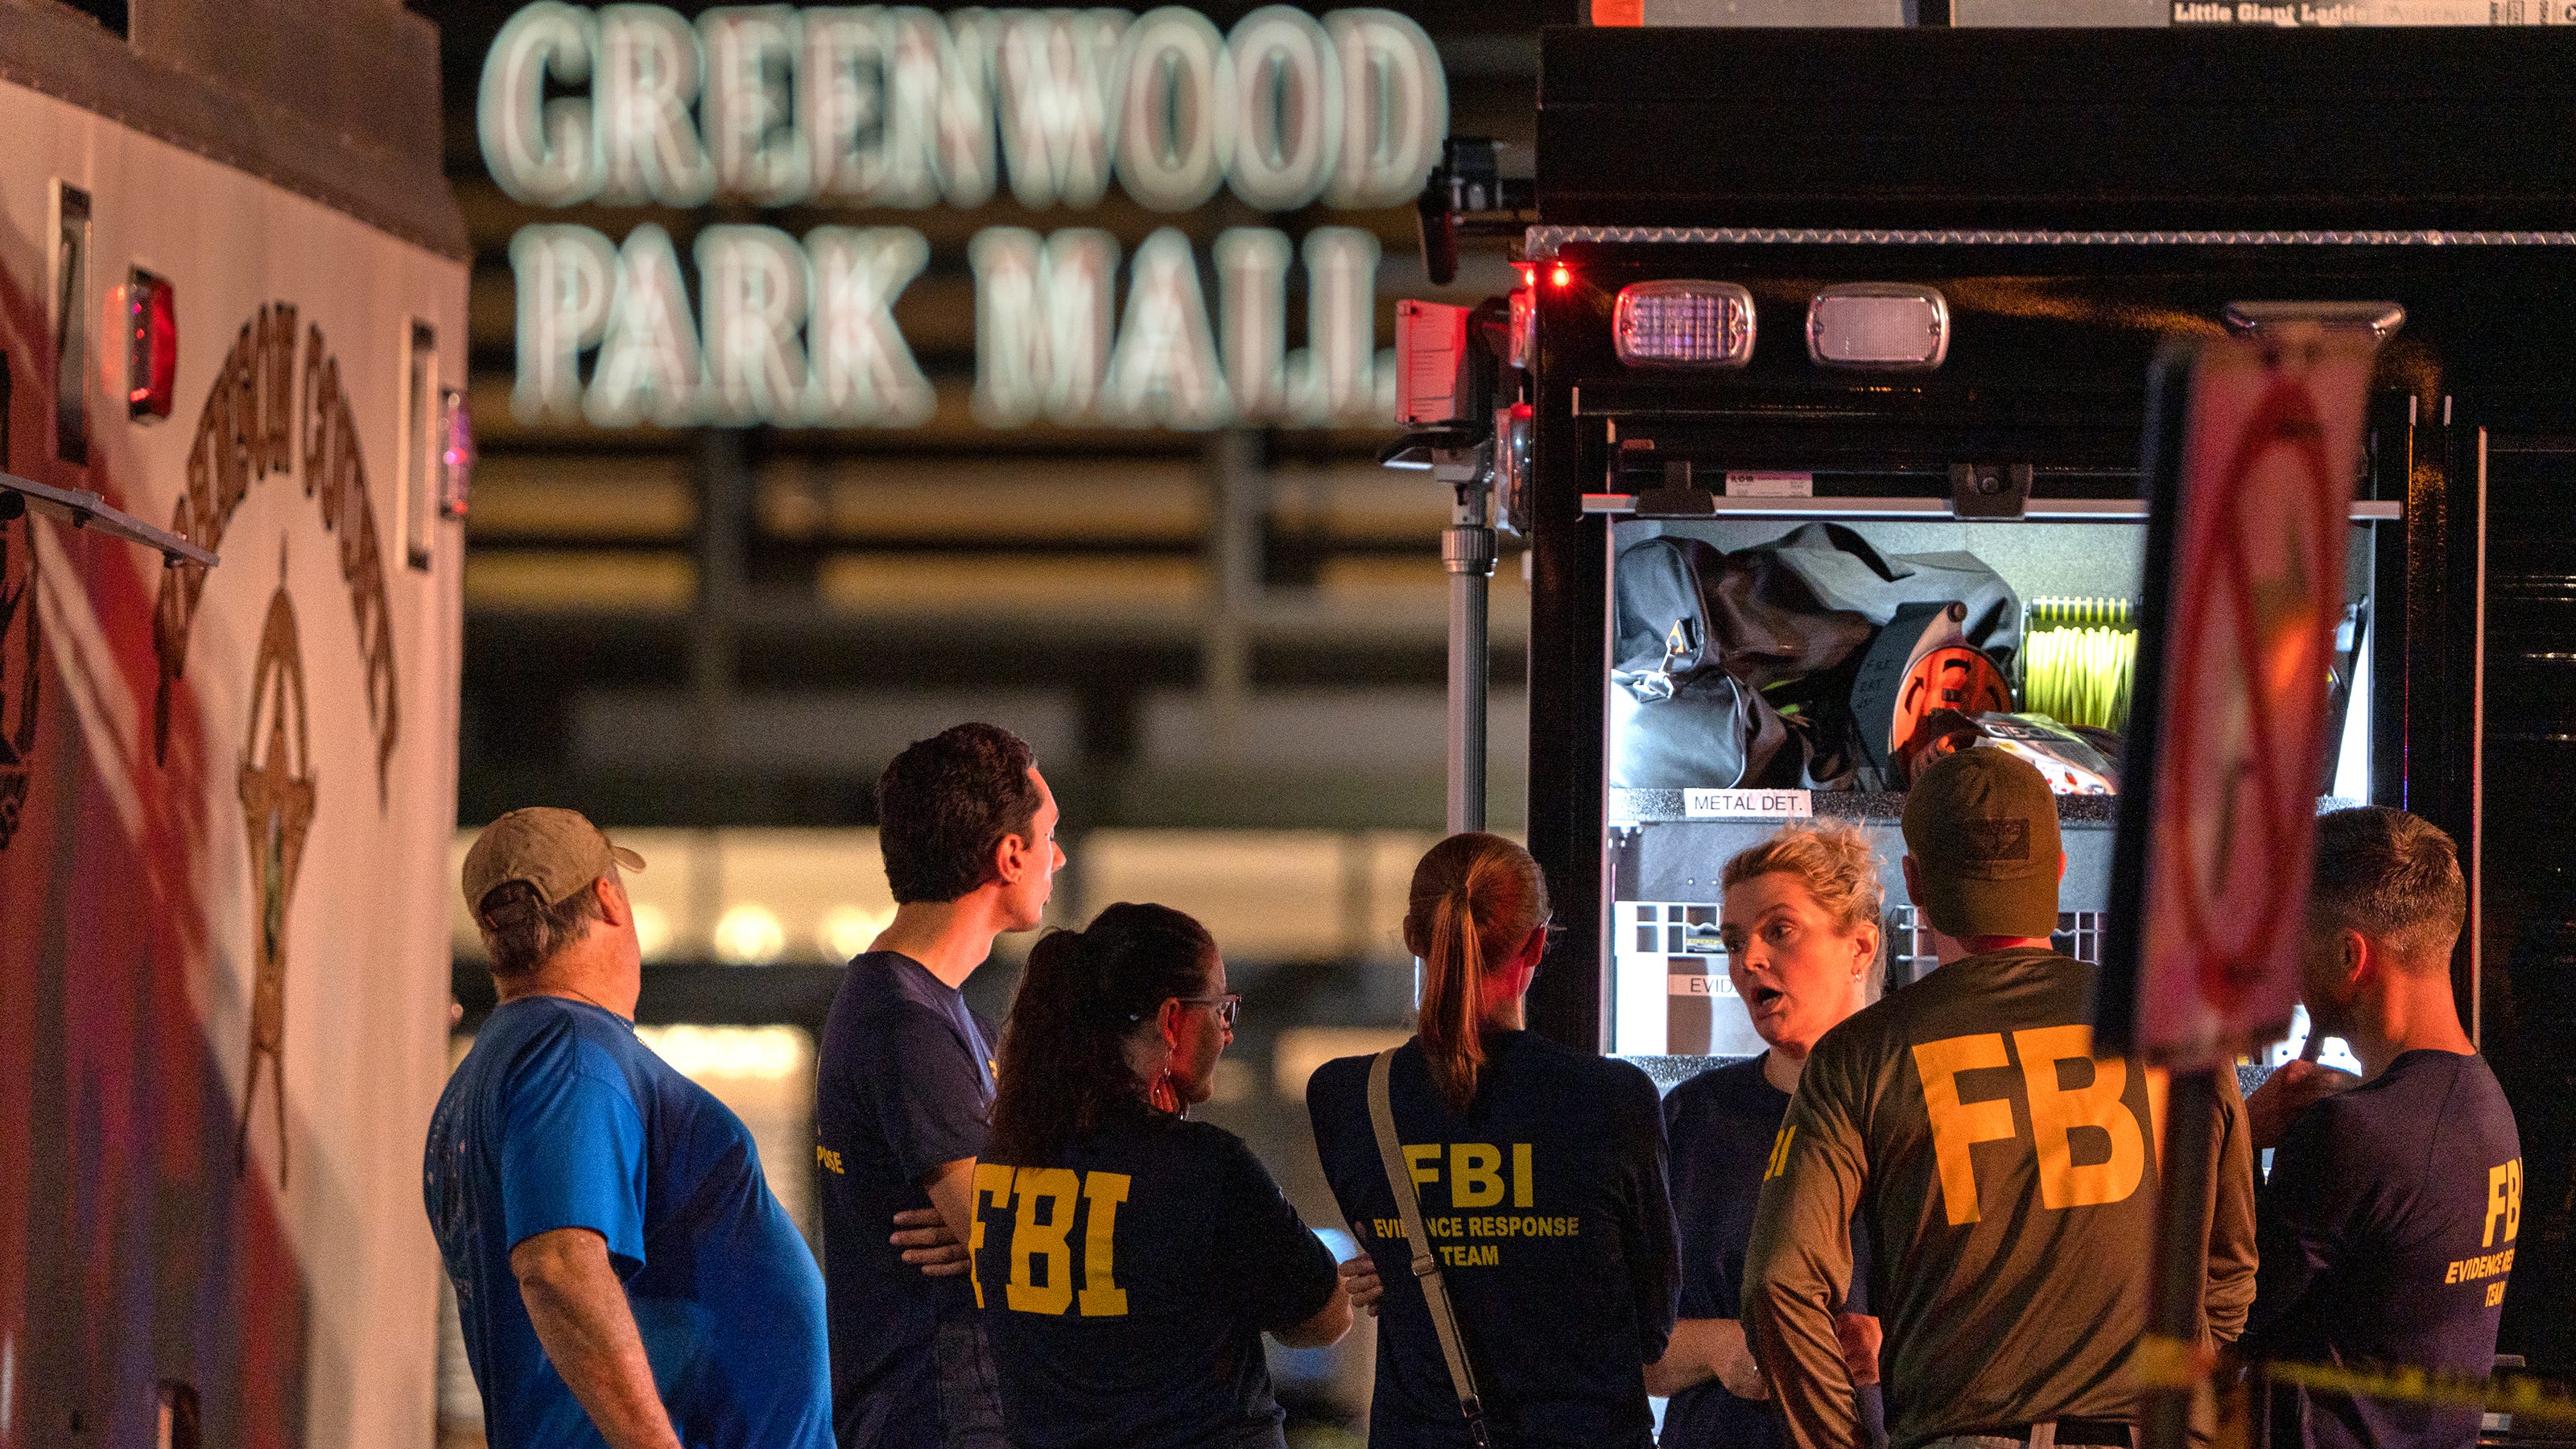 Greenwood Park Mall shooting leaves 4 dead, including gunman